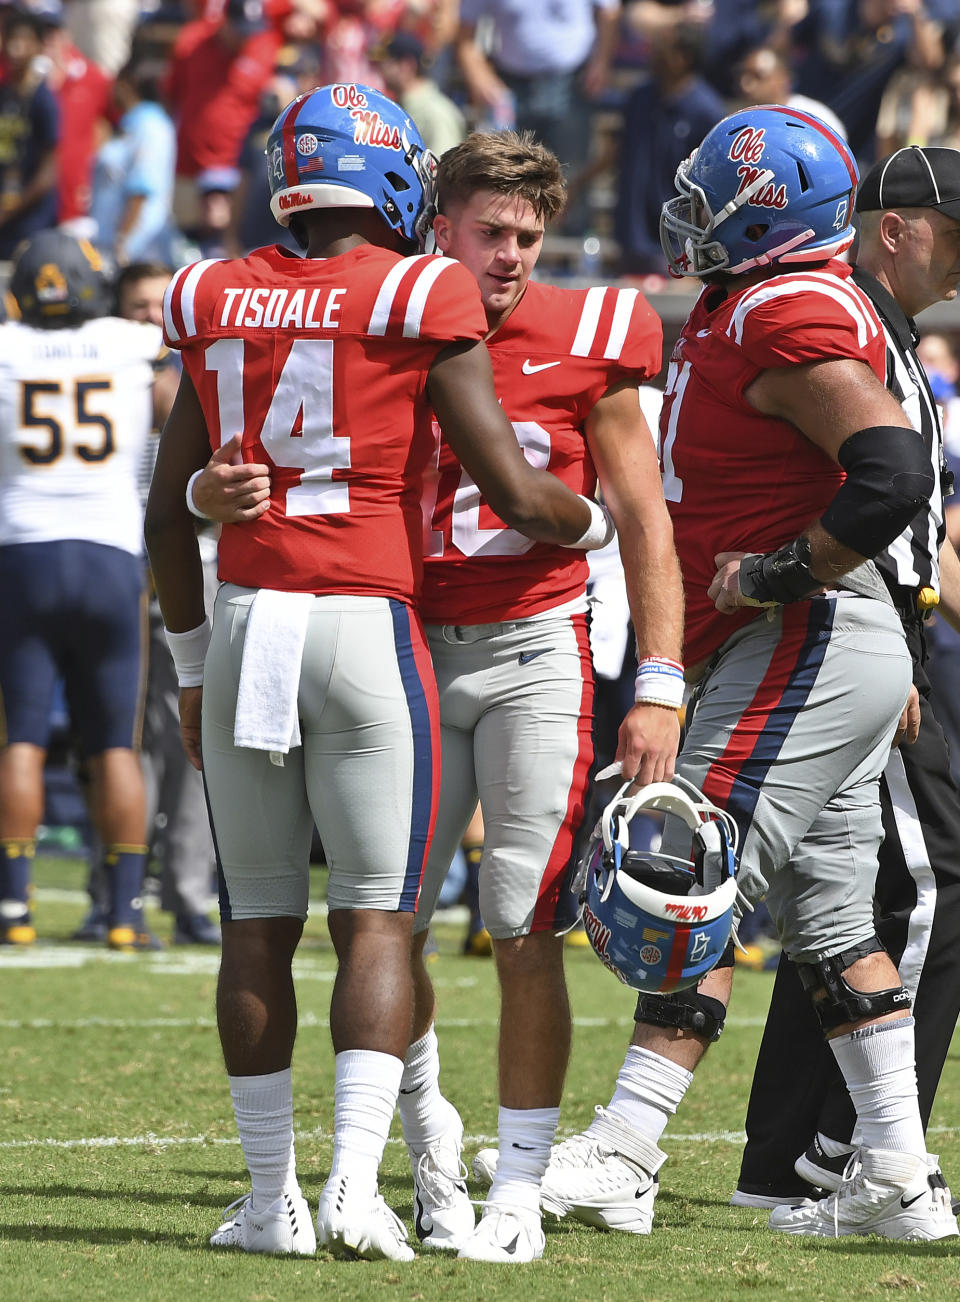 Mississippi's Grant Tisdale (14) consoles John Rhys Plumlee (10) after an NCAA college football game against California in Oxford, Miss., Saturday, Sept. 21, 2019. California won 28-20. (AP Photo/Thomas Graning)